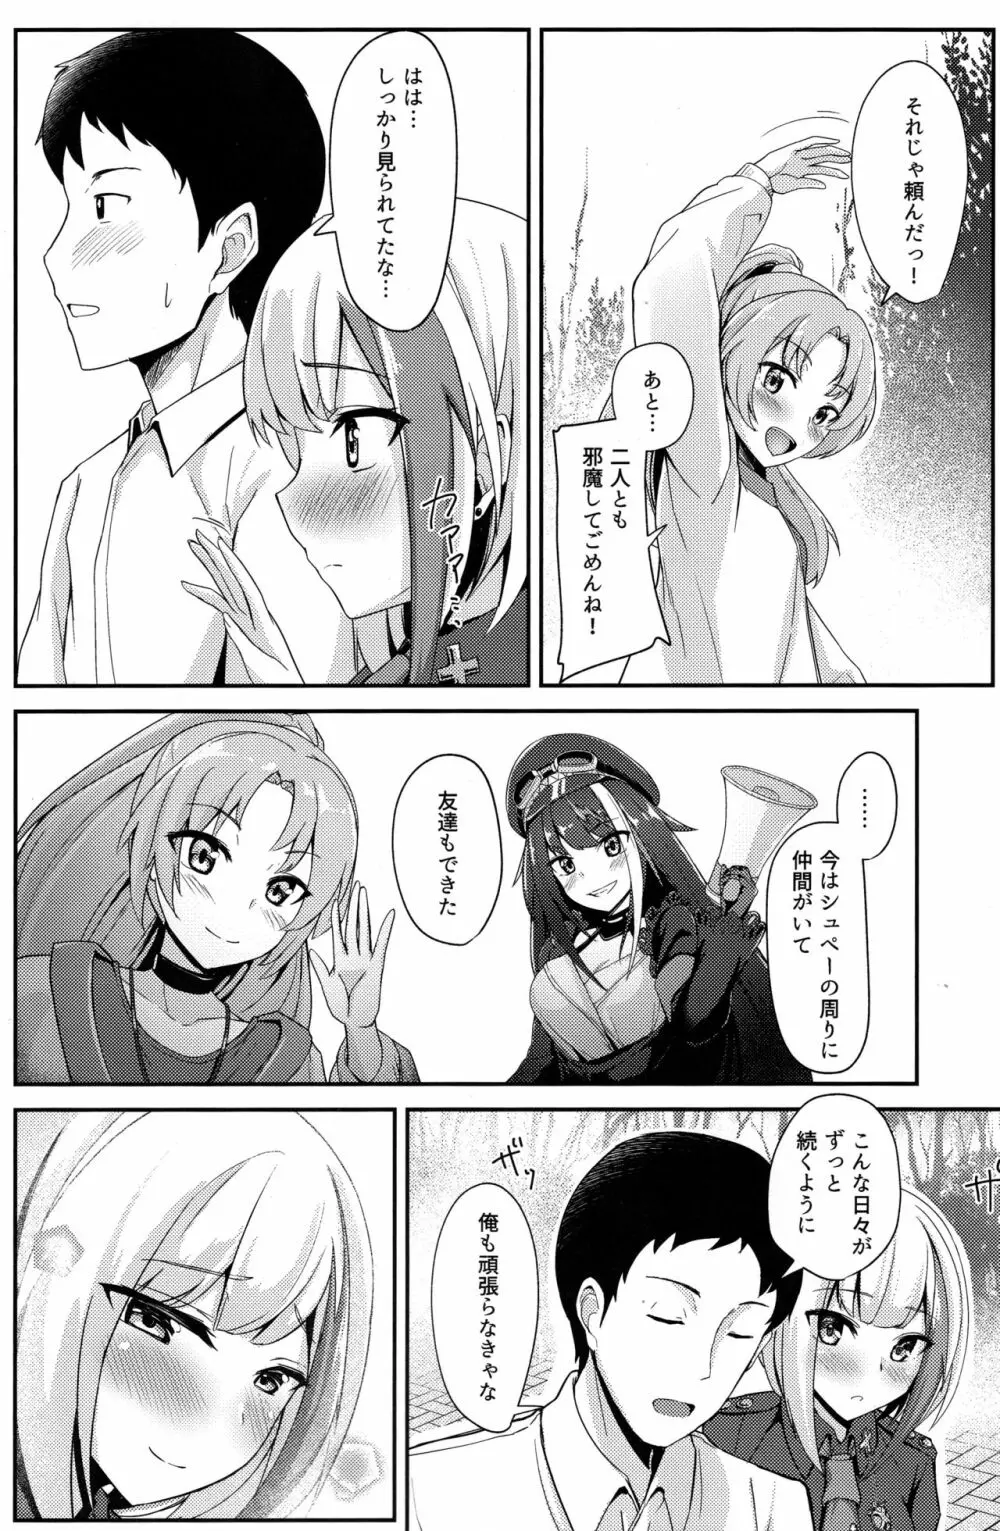 Oridinary Girl in LOVE…？ - page9